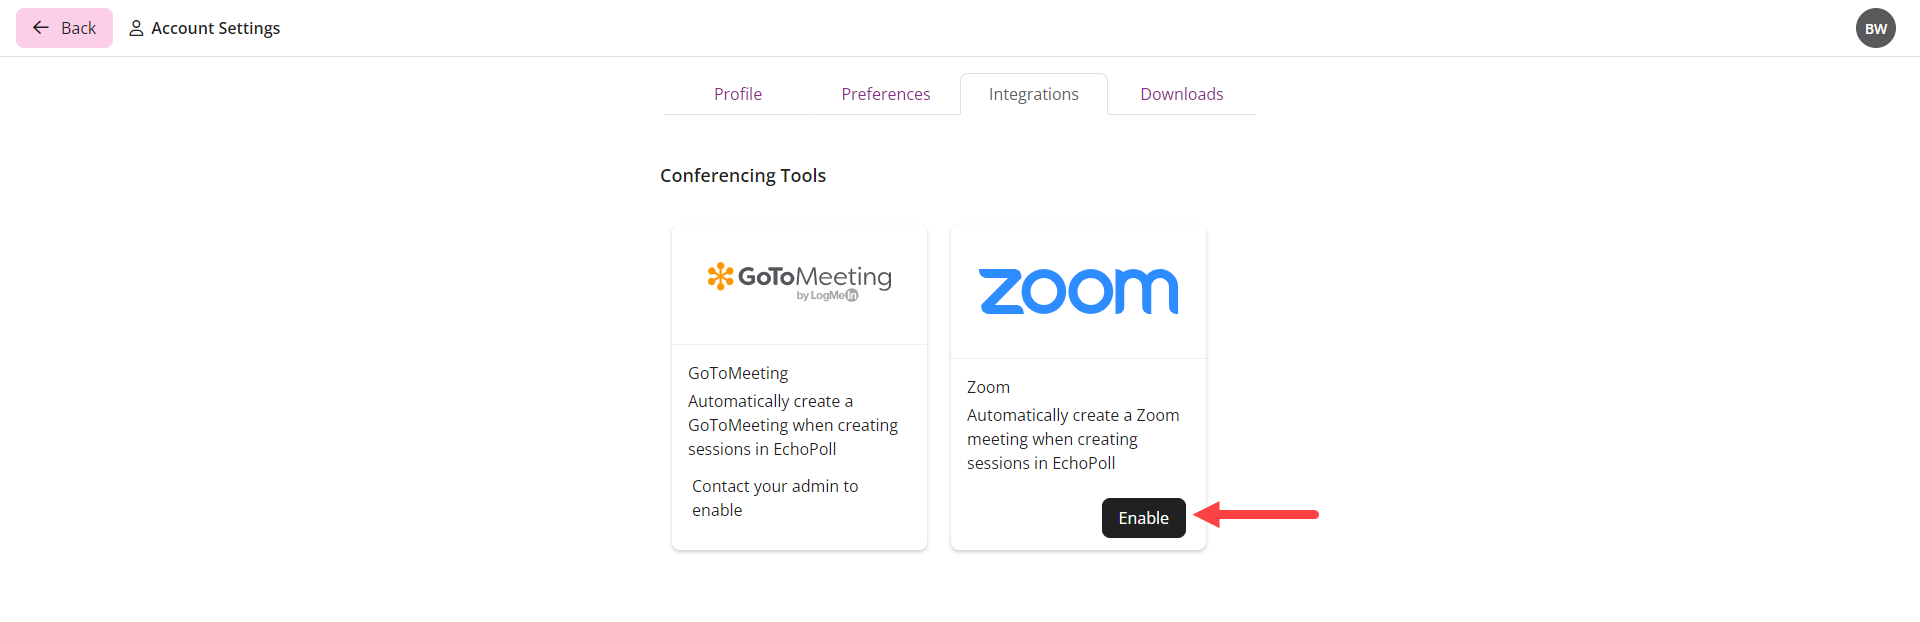 EchoPoll Integrations page with Zoom Enable button identified as described